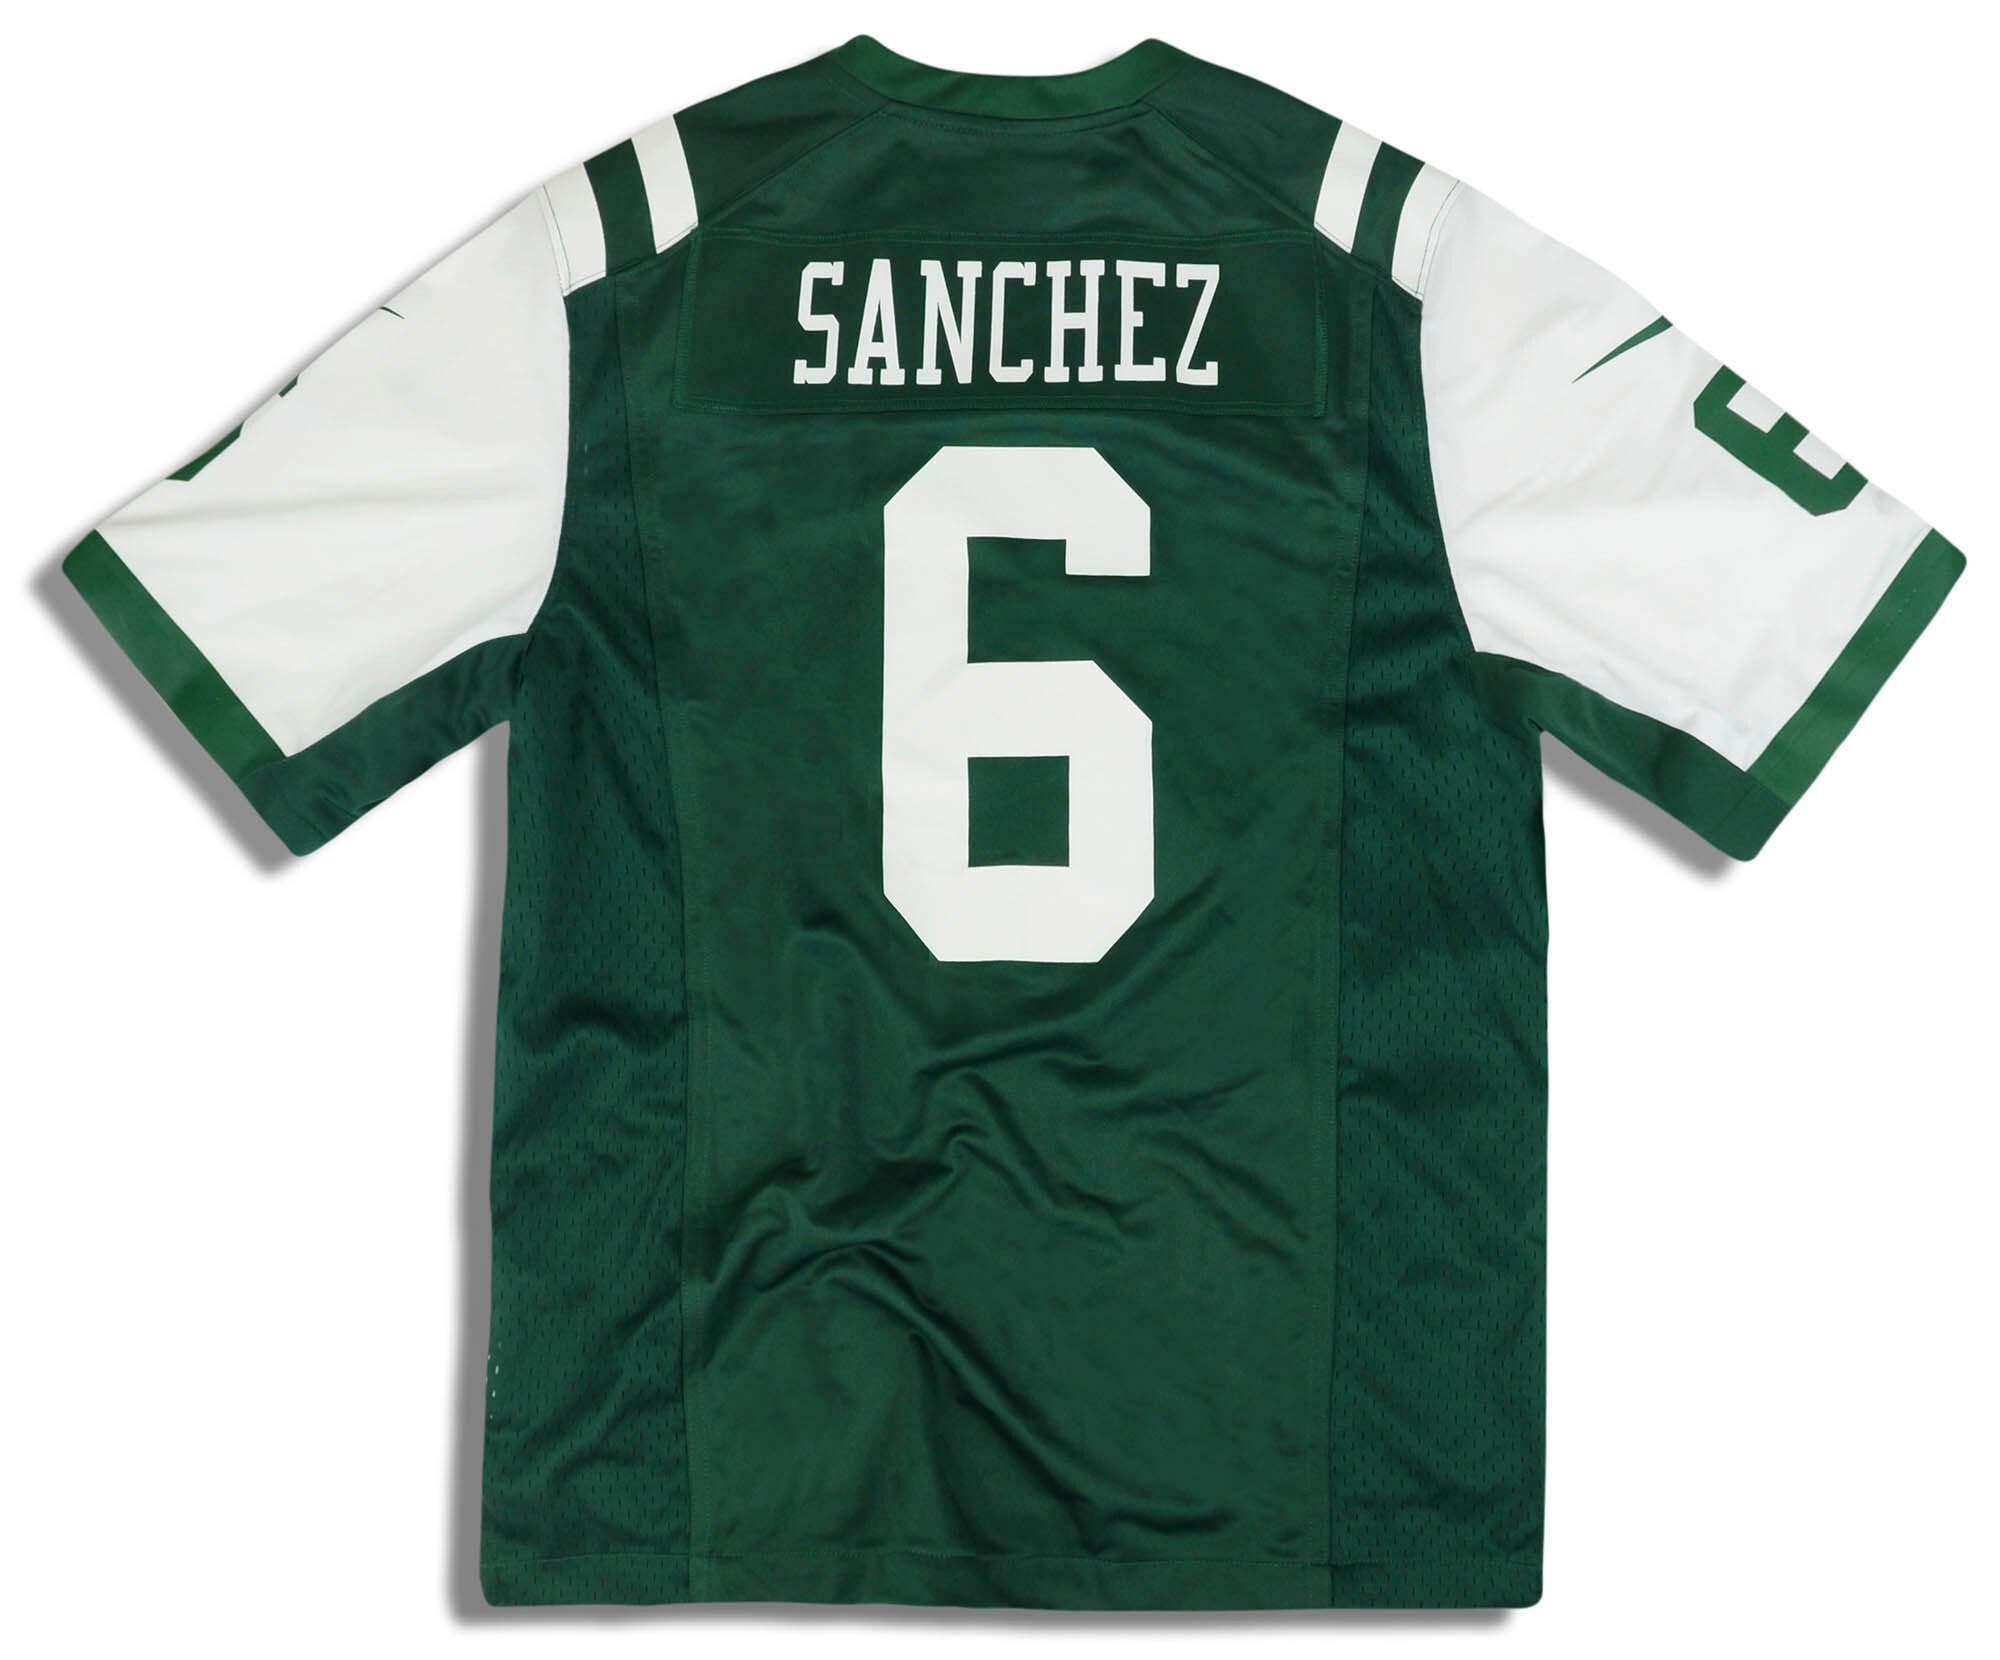 2012-13 NEW YORK JETS SANCHEZ #6 NIKE GAME JERSEY (HOME) XL